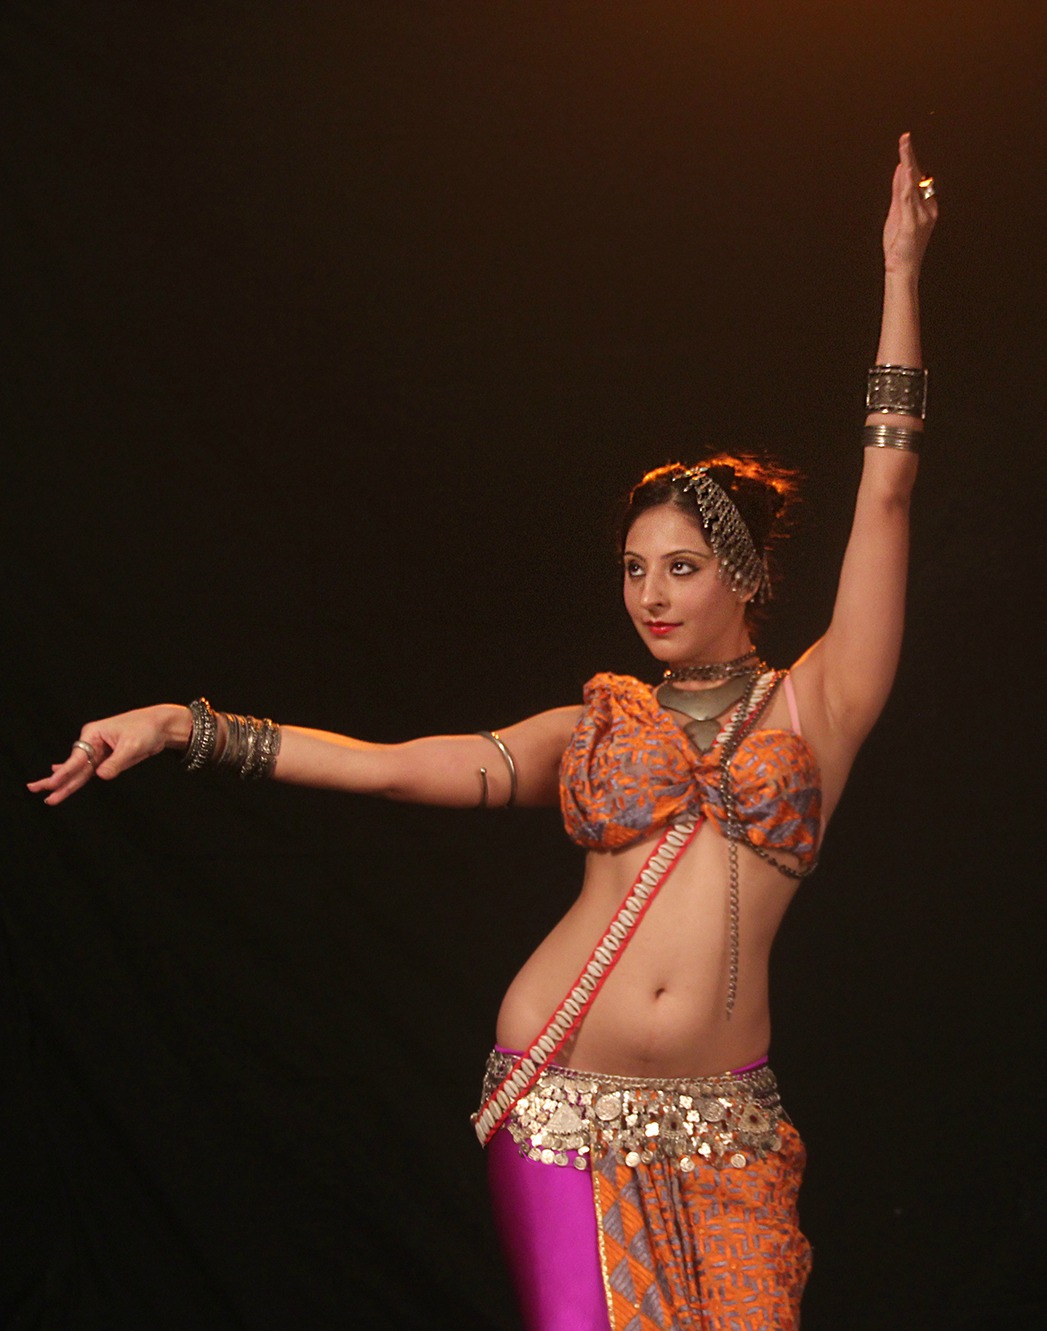 Did not see this belly dance, so what did you see ..! Is India a dancer earning a name in this field all over the world